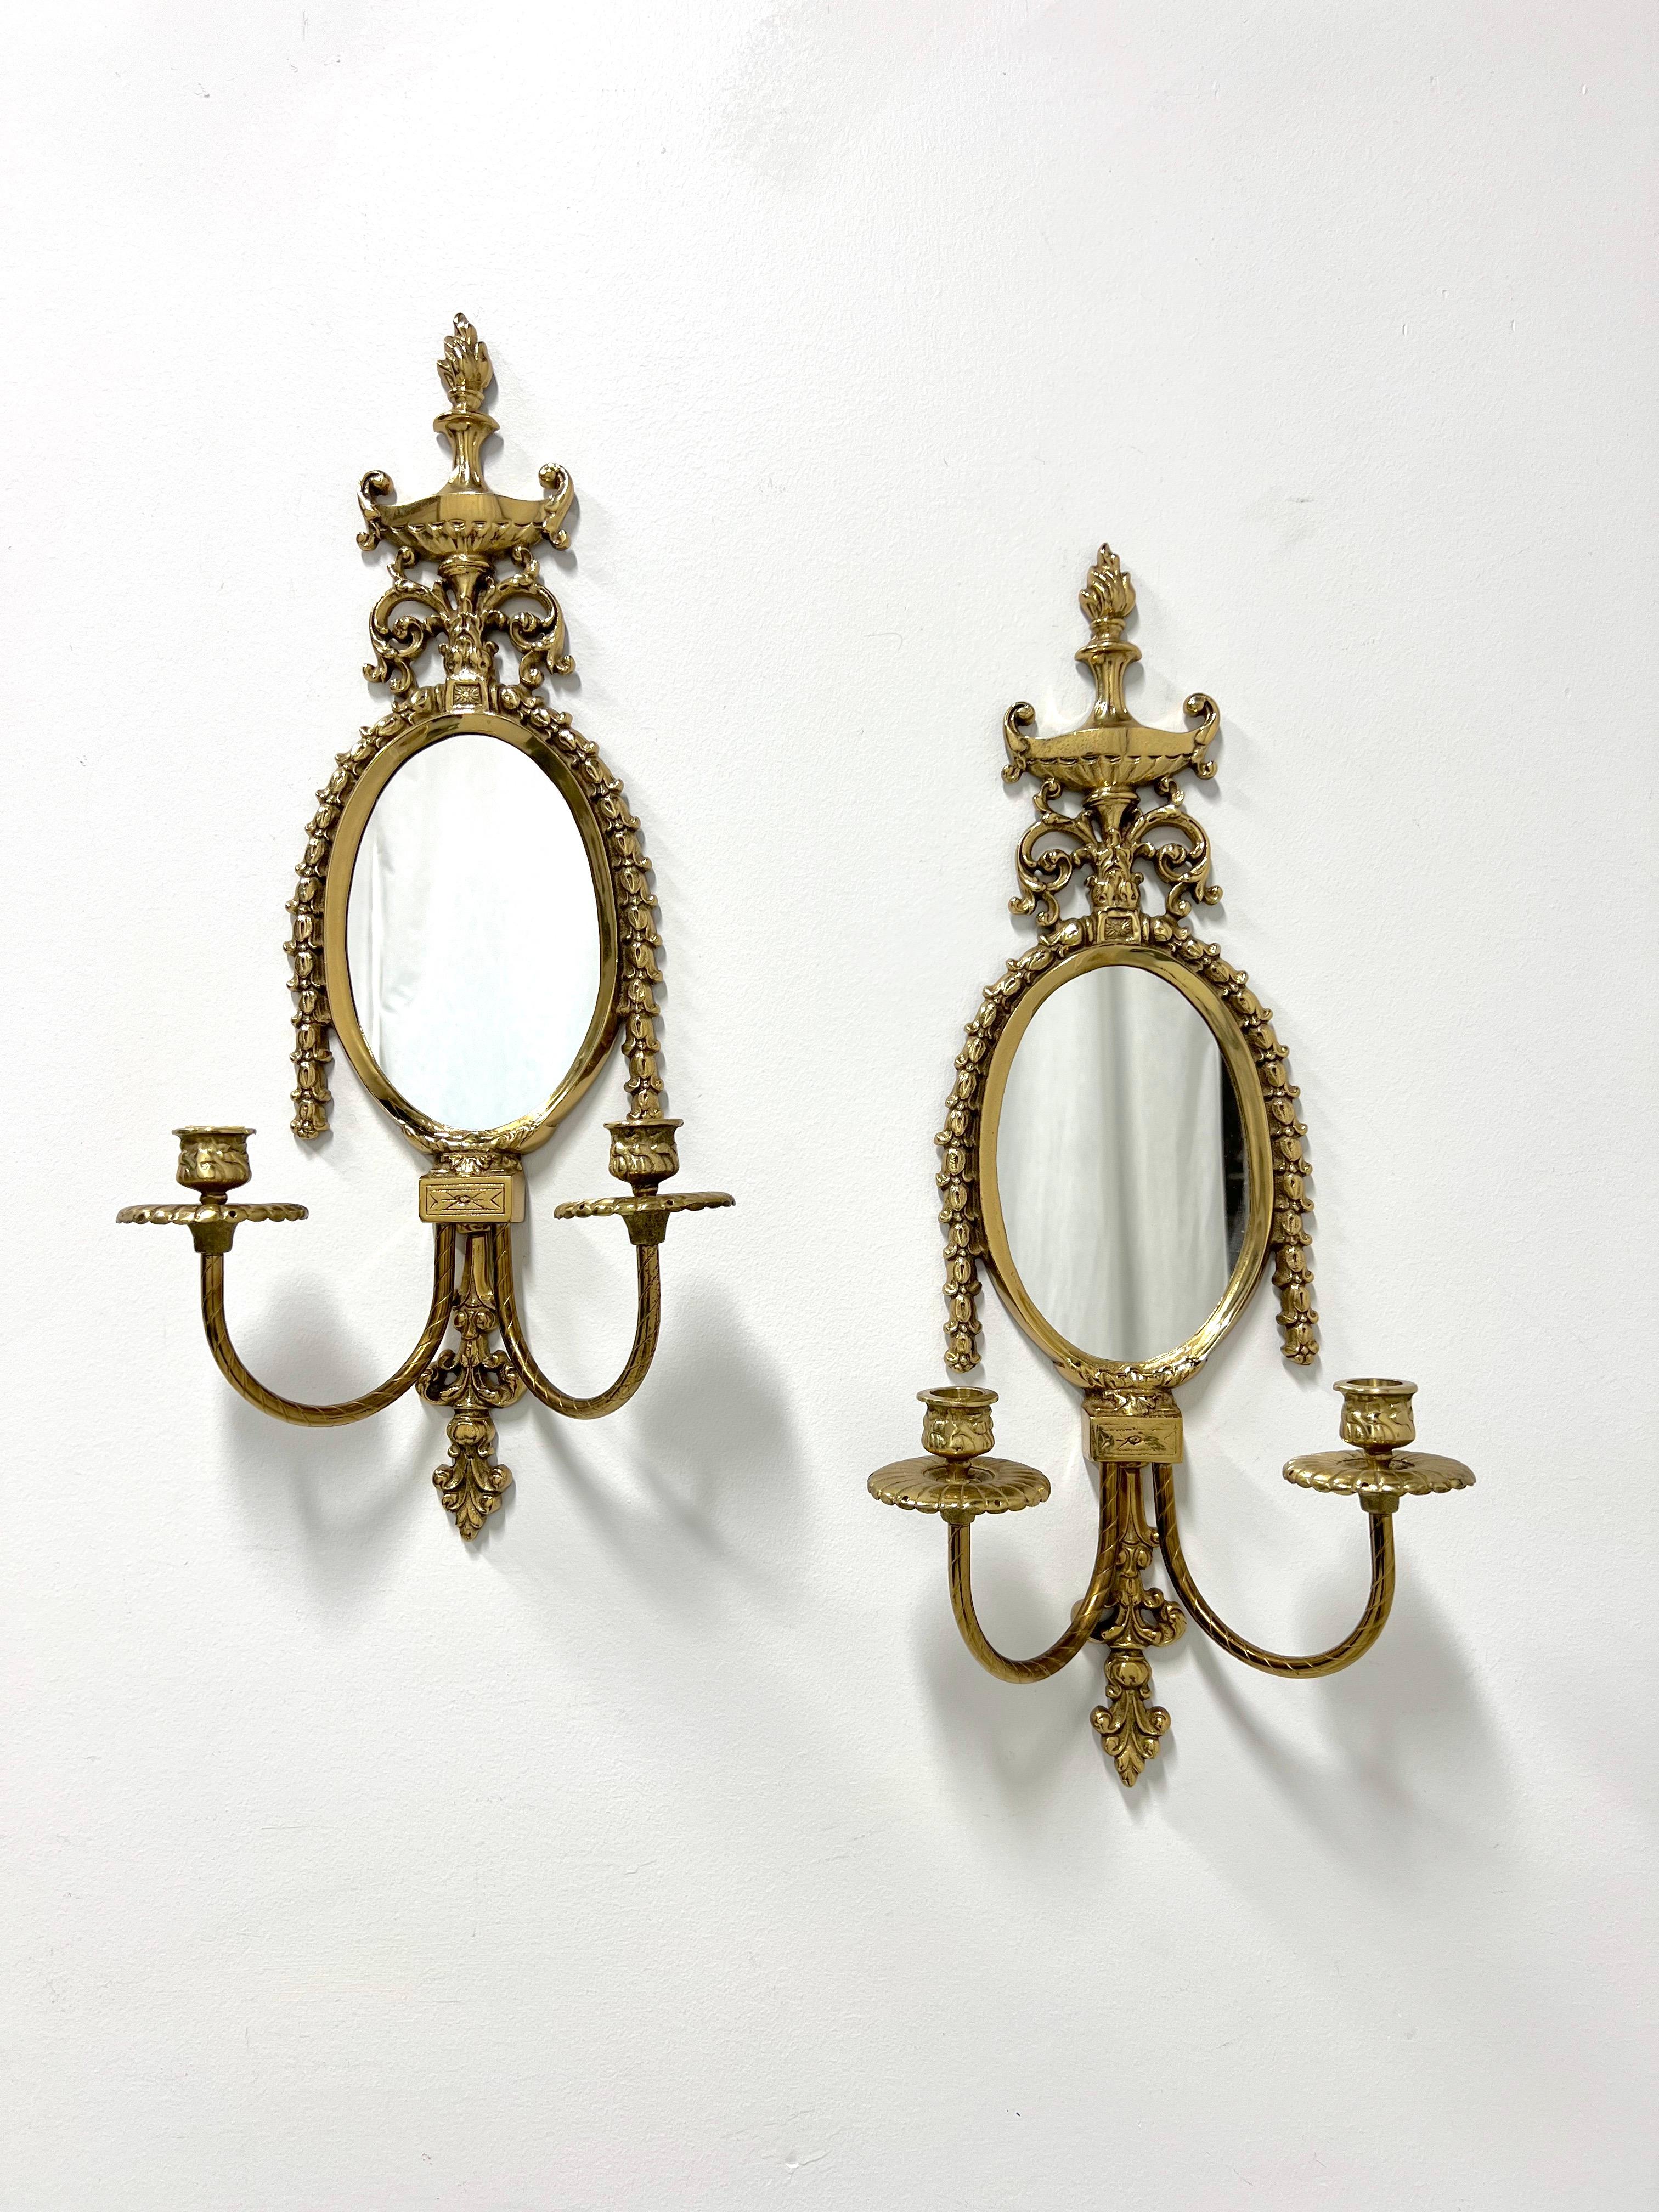 A pair of French Provincial style mirrored candle wall sconces by Glo-Mar Artworks. Solid brass decoratively sculpted with a center oval shaped mirror, garland swag draping the mirror top, urn shape to very top, decorative base, and two curved arms